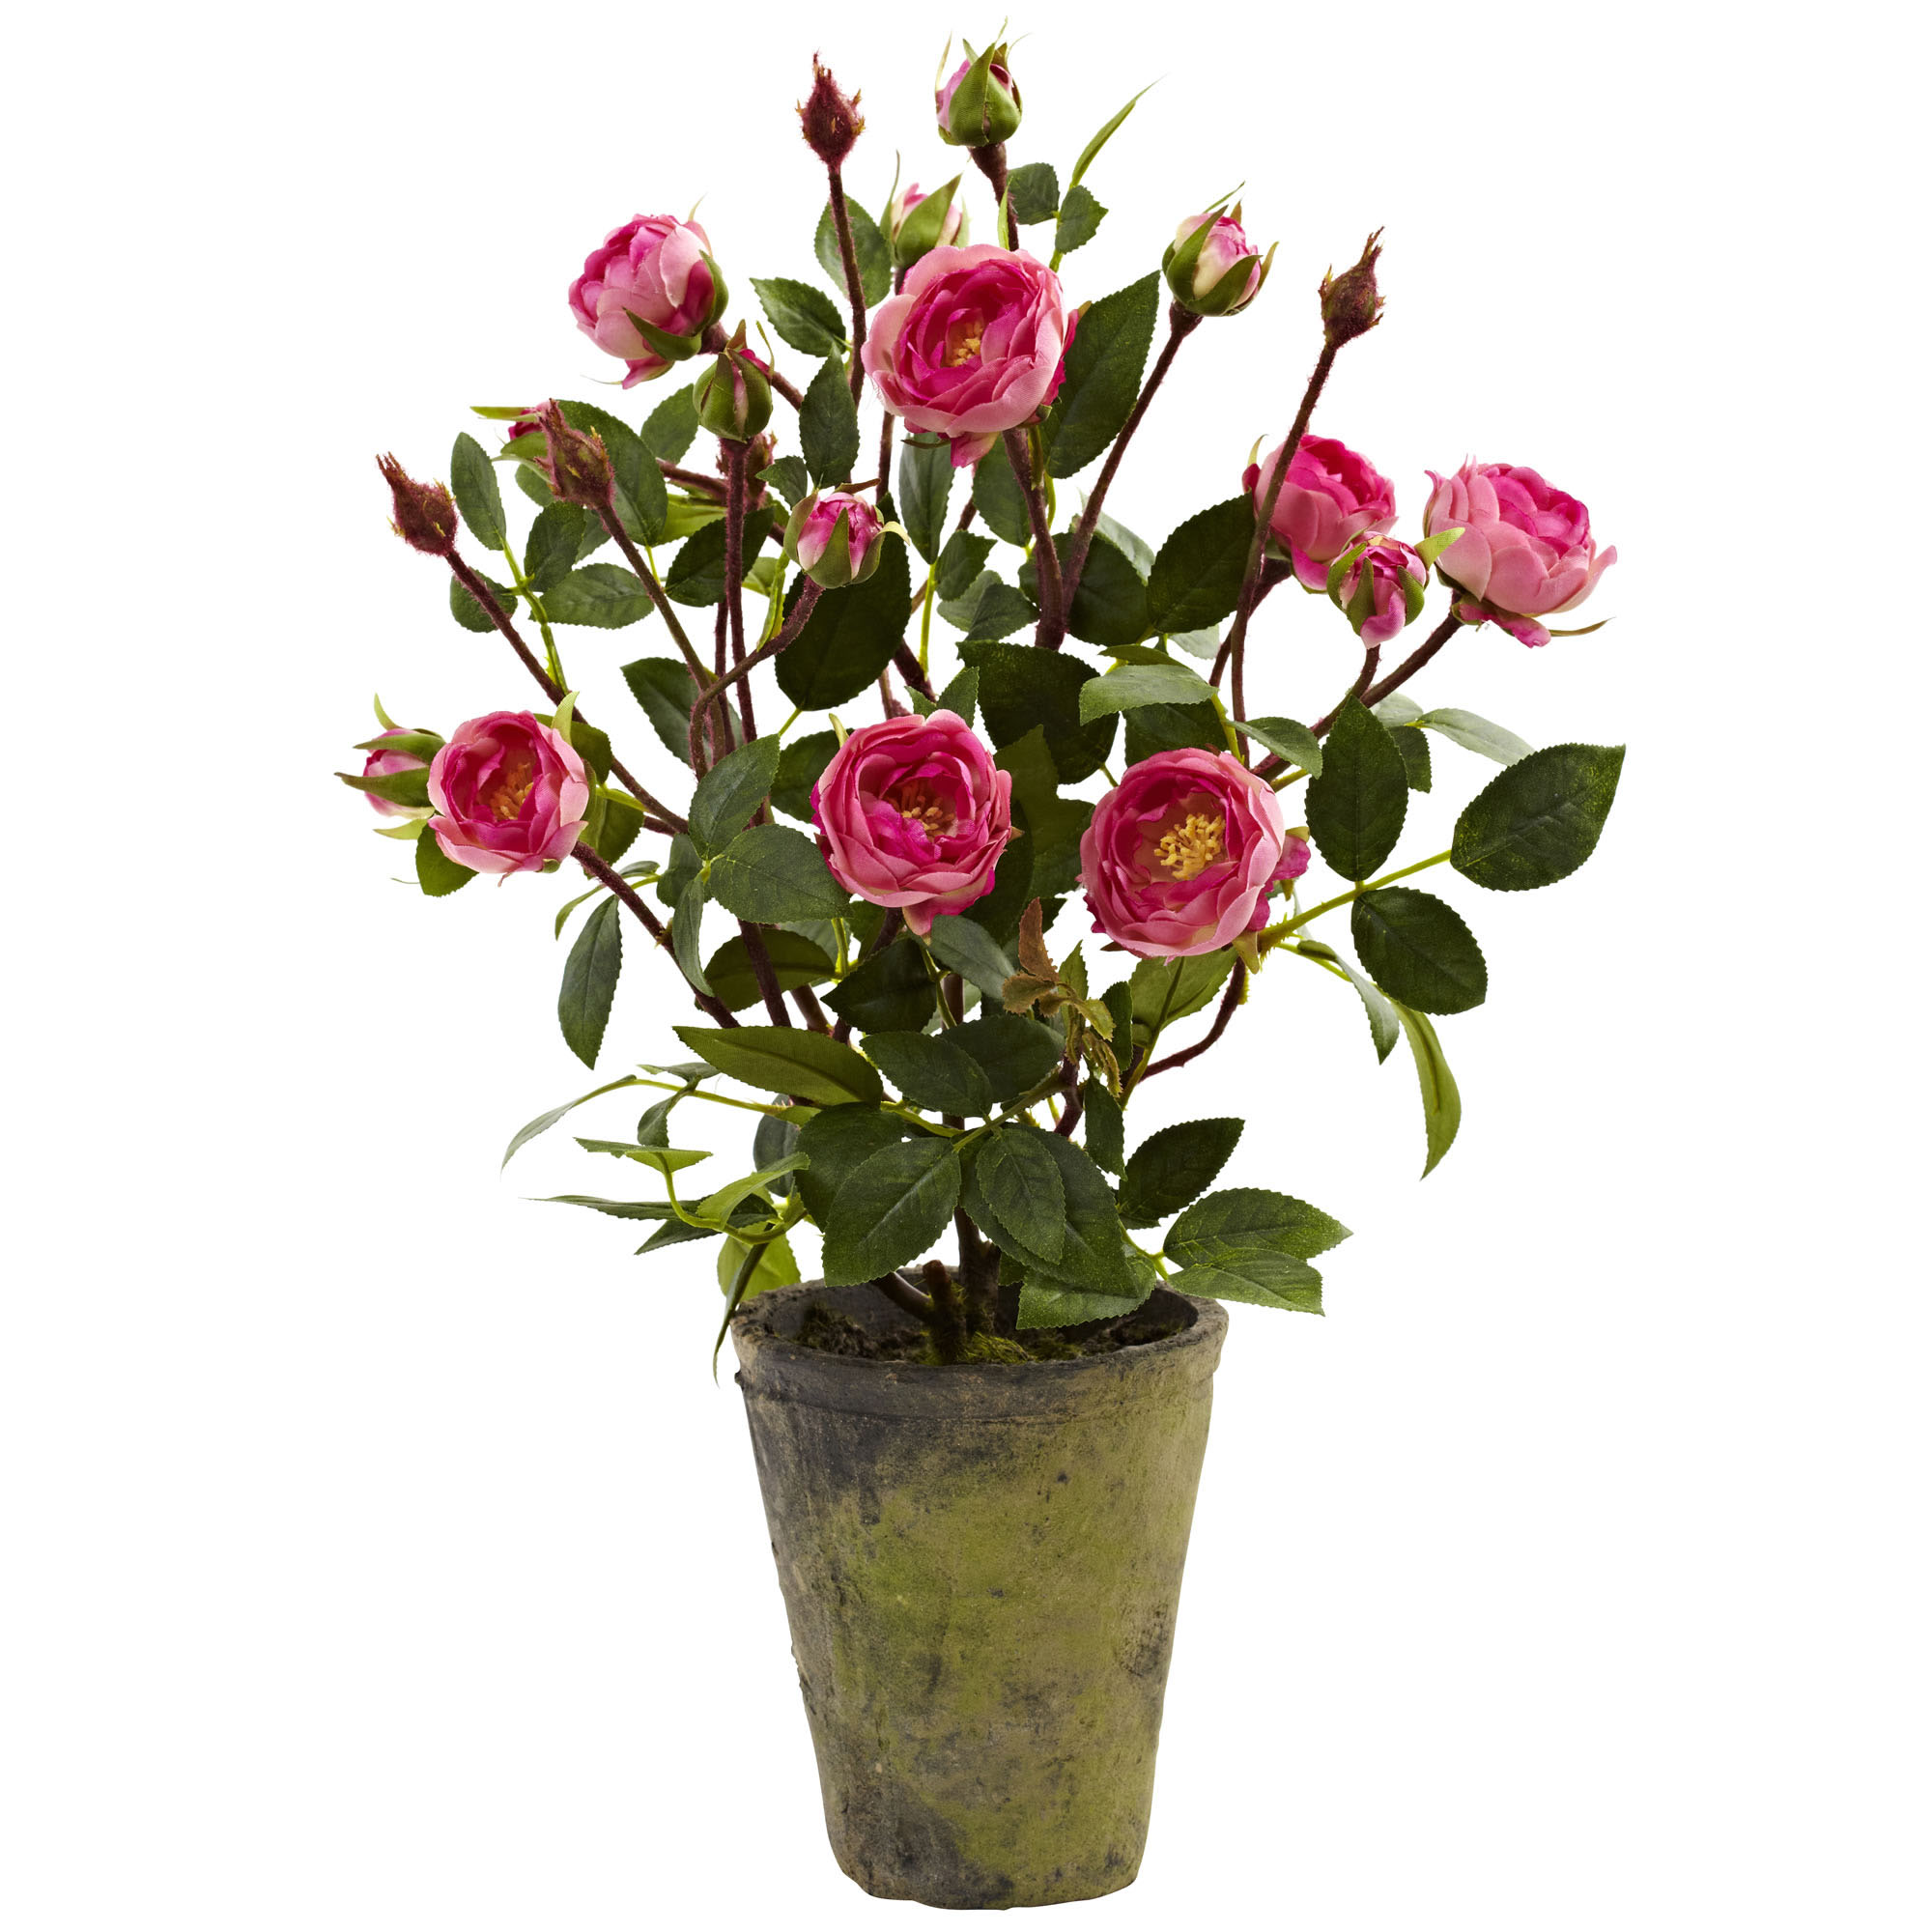 14 Inch Indoor Silk French Rose Garden: Potted